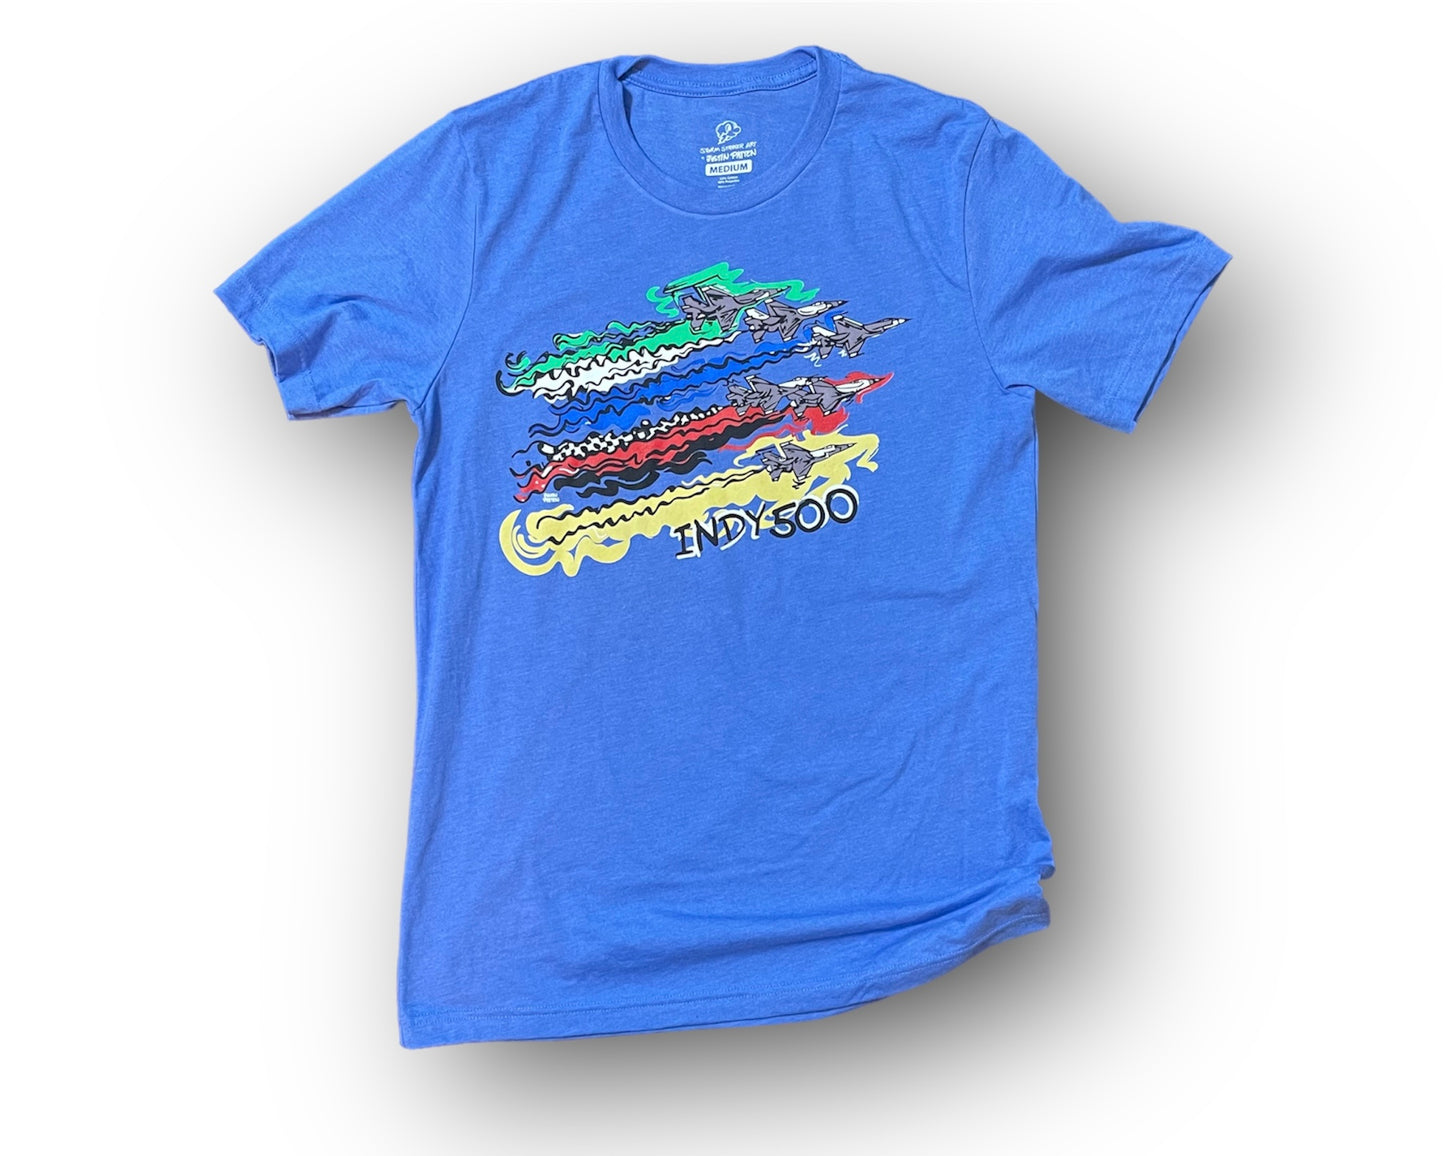 Indianapolis Motor Speedway Flyover Tee by Justin Patten